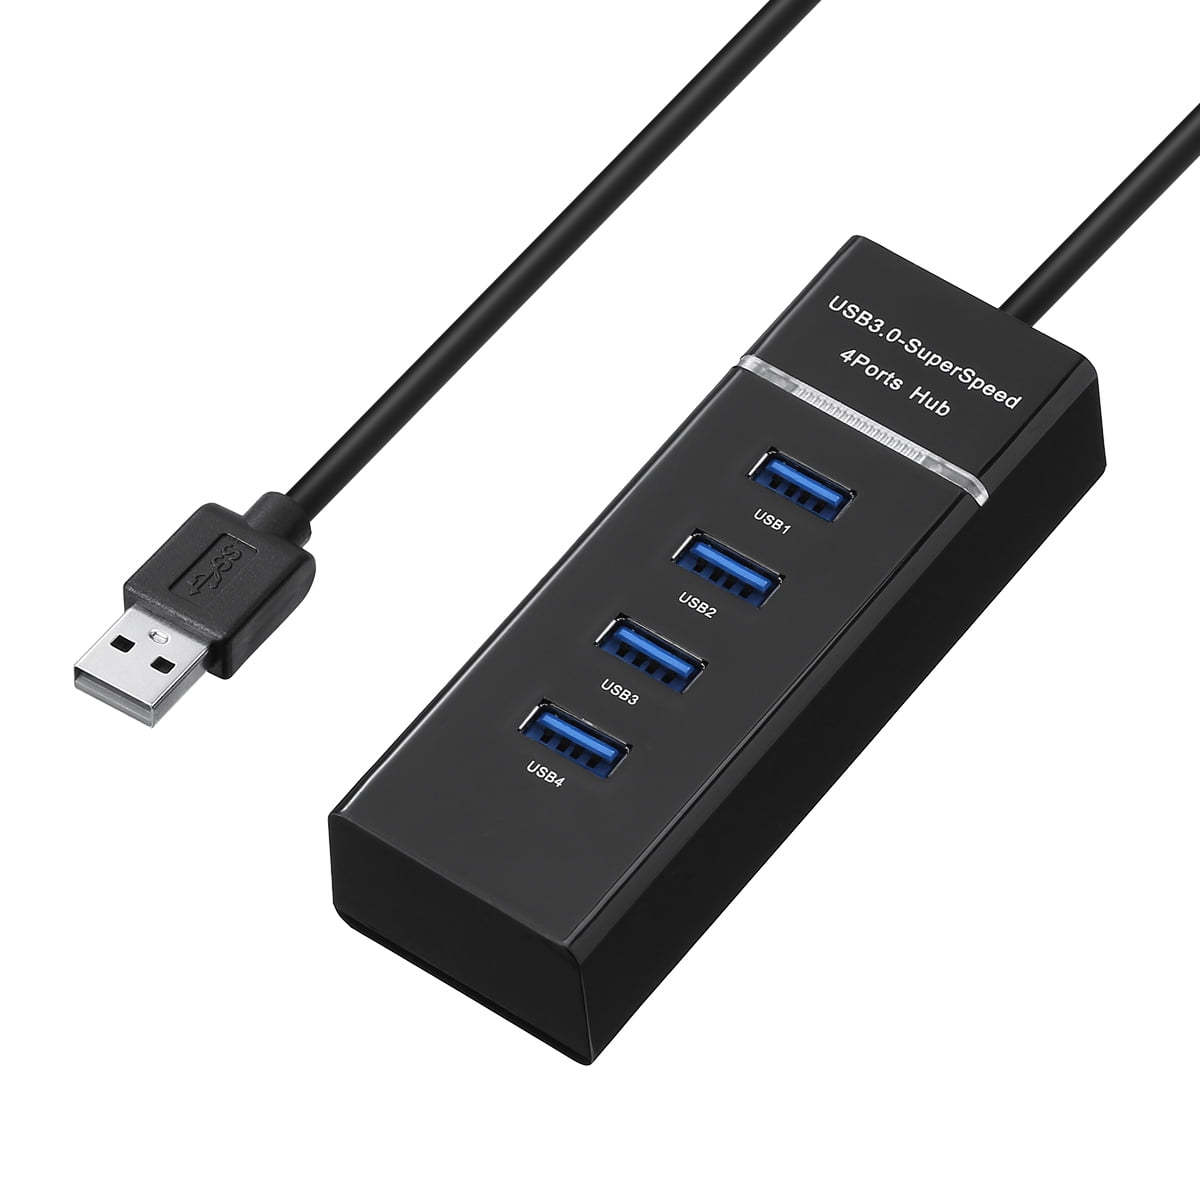 Quantum 4 Port USB Hub (1 Port 3.0 & 3 Port 2.0) with High Speed Data  Transfer, Plug Play Usage, Compatible with Laptop, PC and Other USB-A  Devices, QHM7532 (Black) - Buy